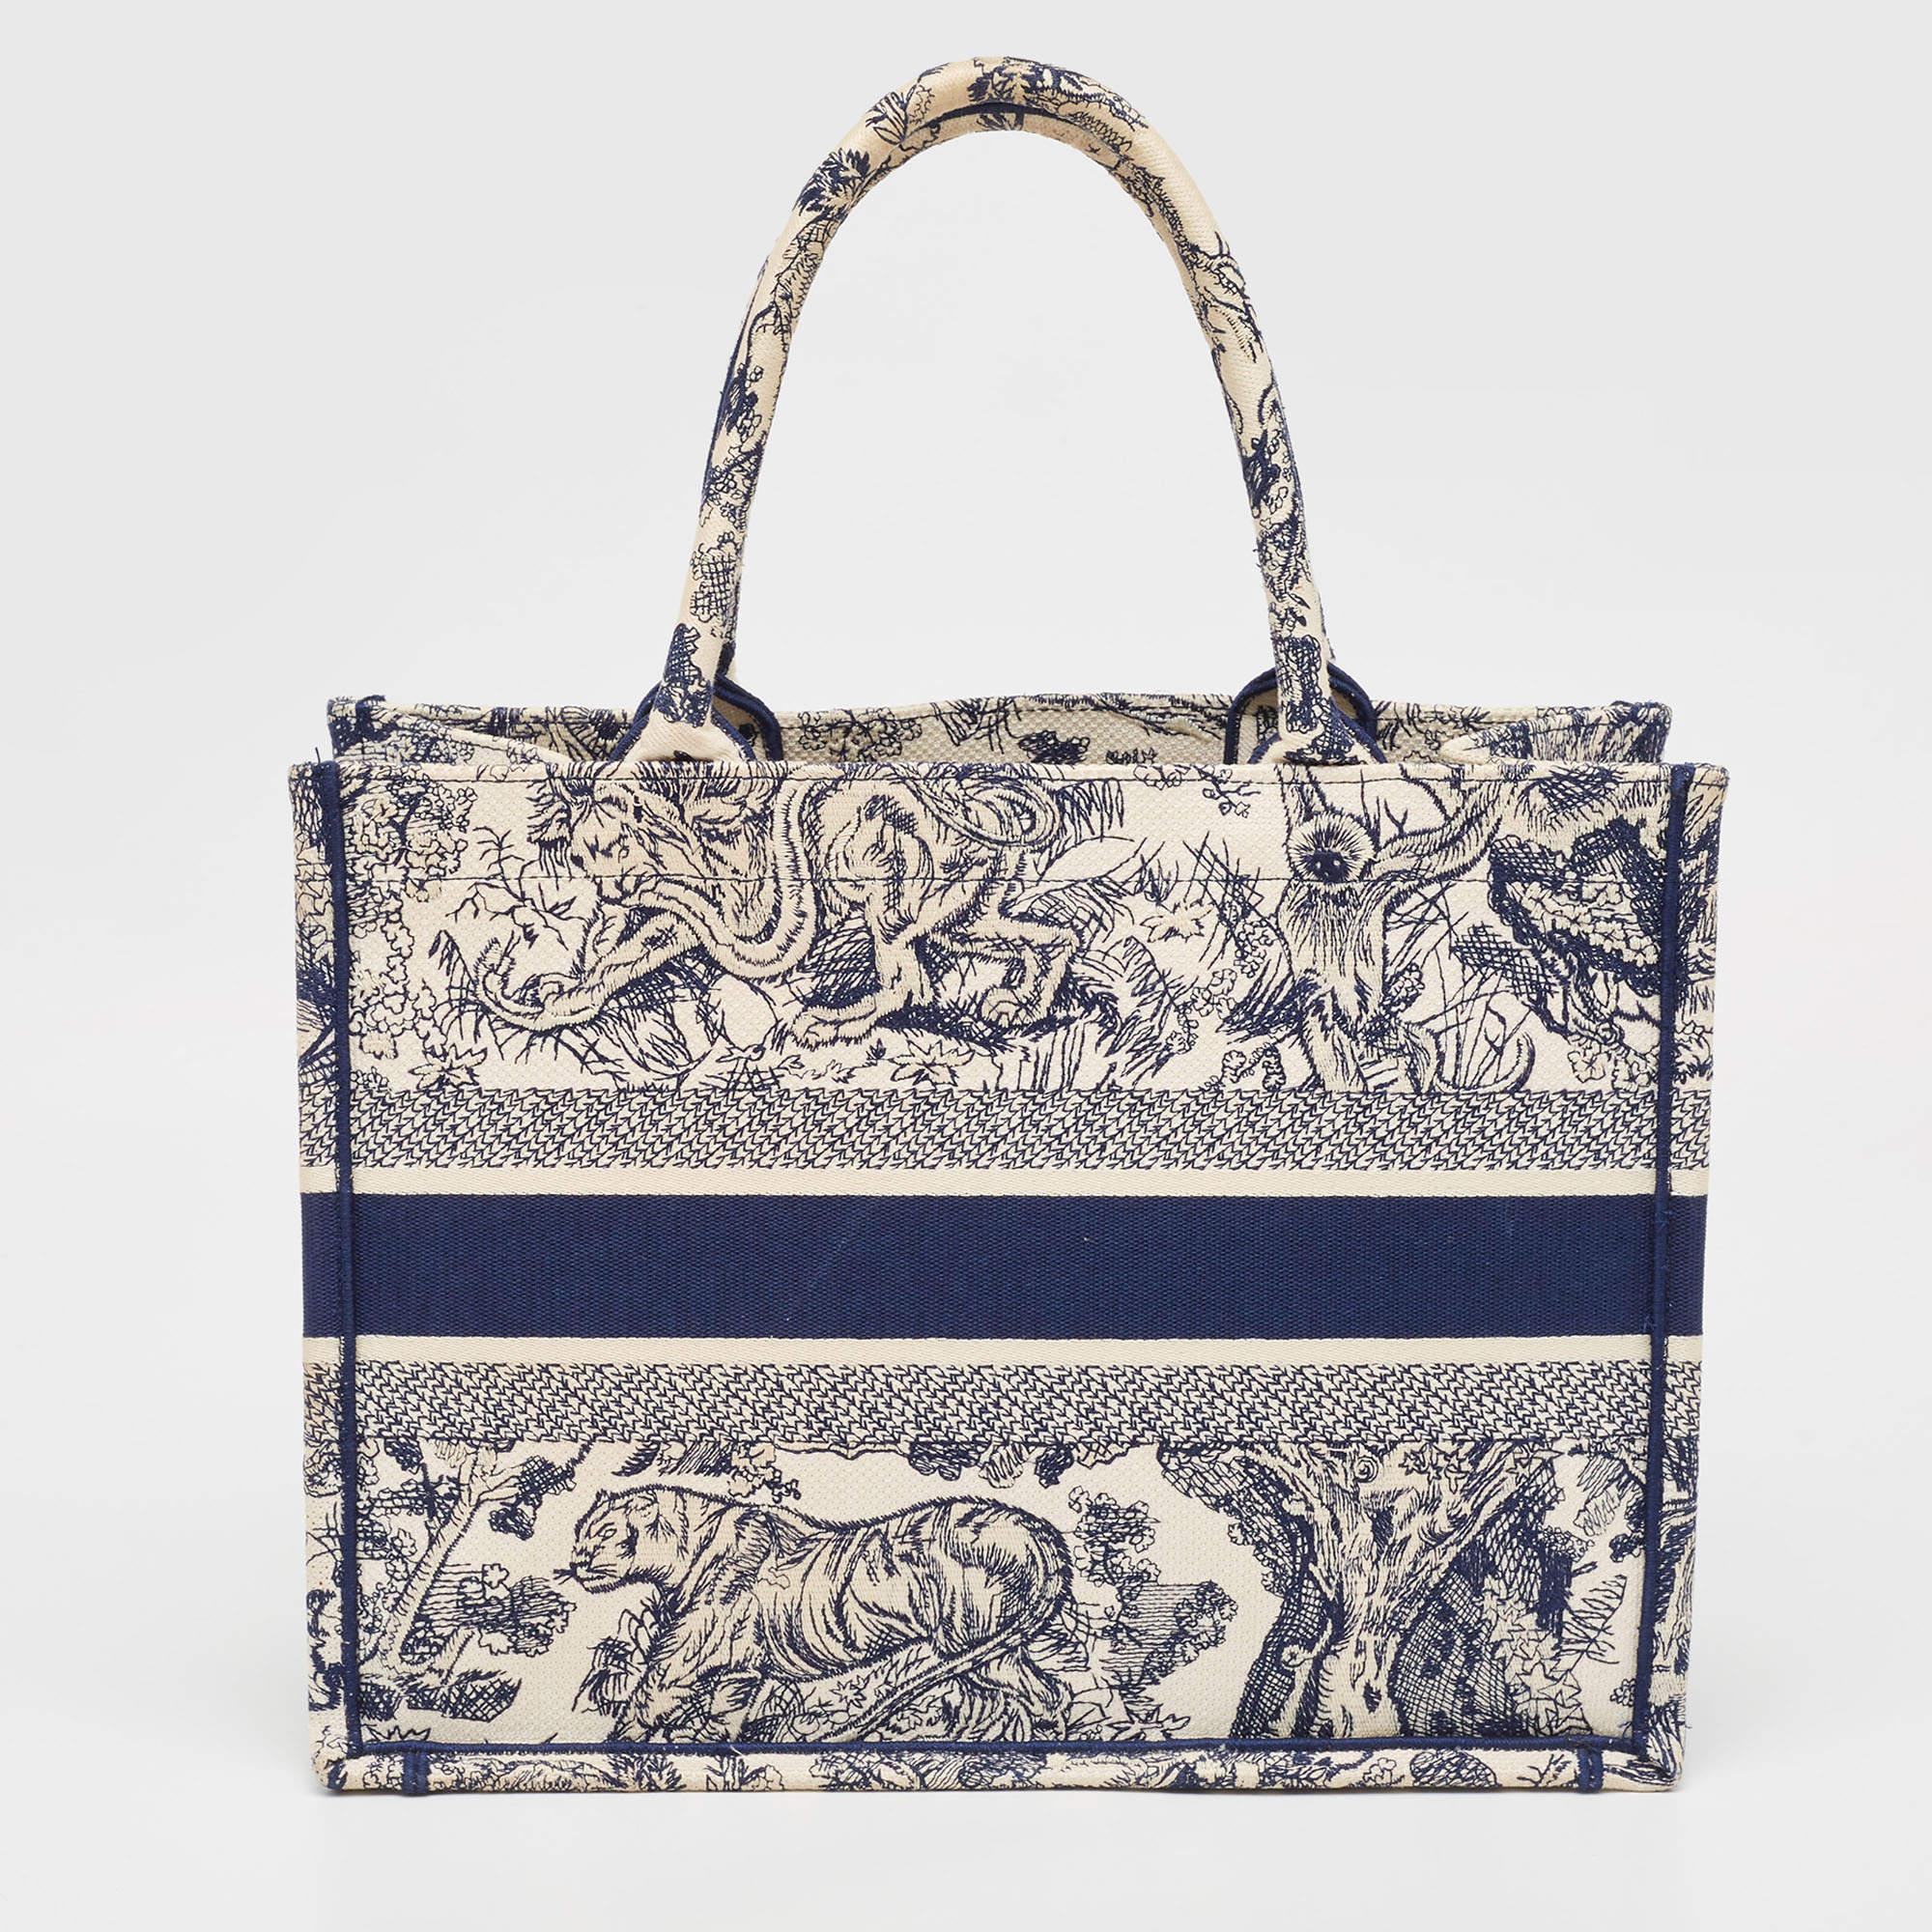 Designed by Maria Grazia Chiuri, the Dior Book Tote is a travel accessory for people with style. The bag here is crafted using canvas into a beautiful structure and is covered in signature prints all over. Two handles, the 'Christian Dior'